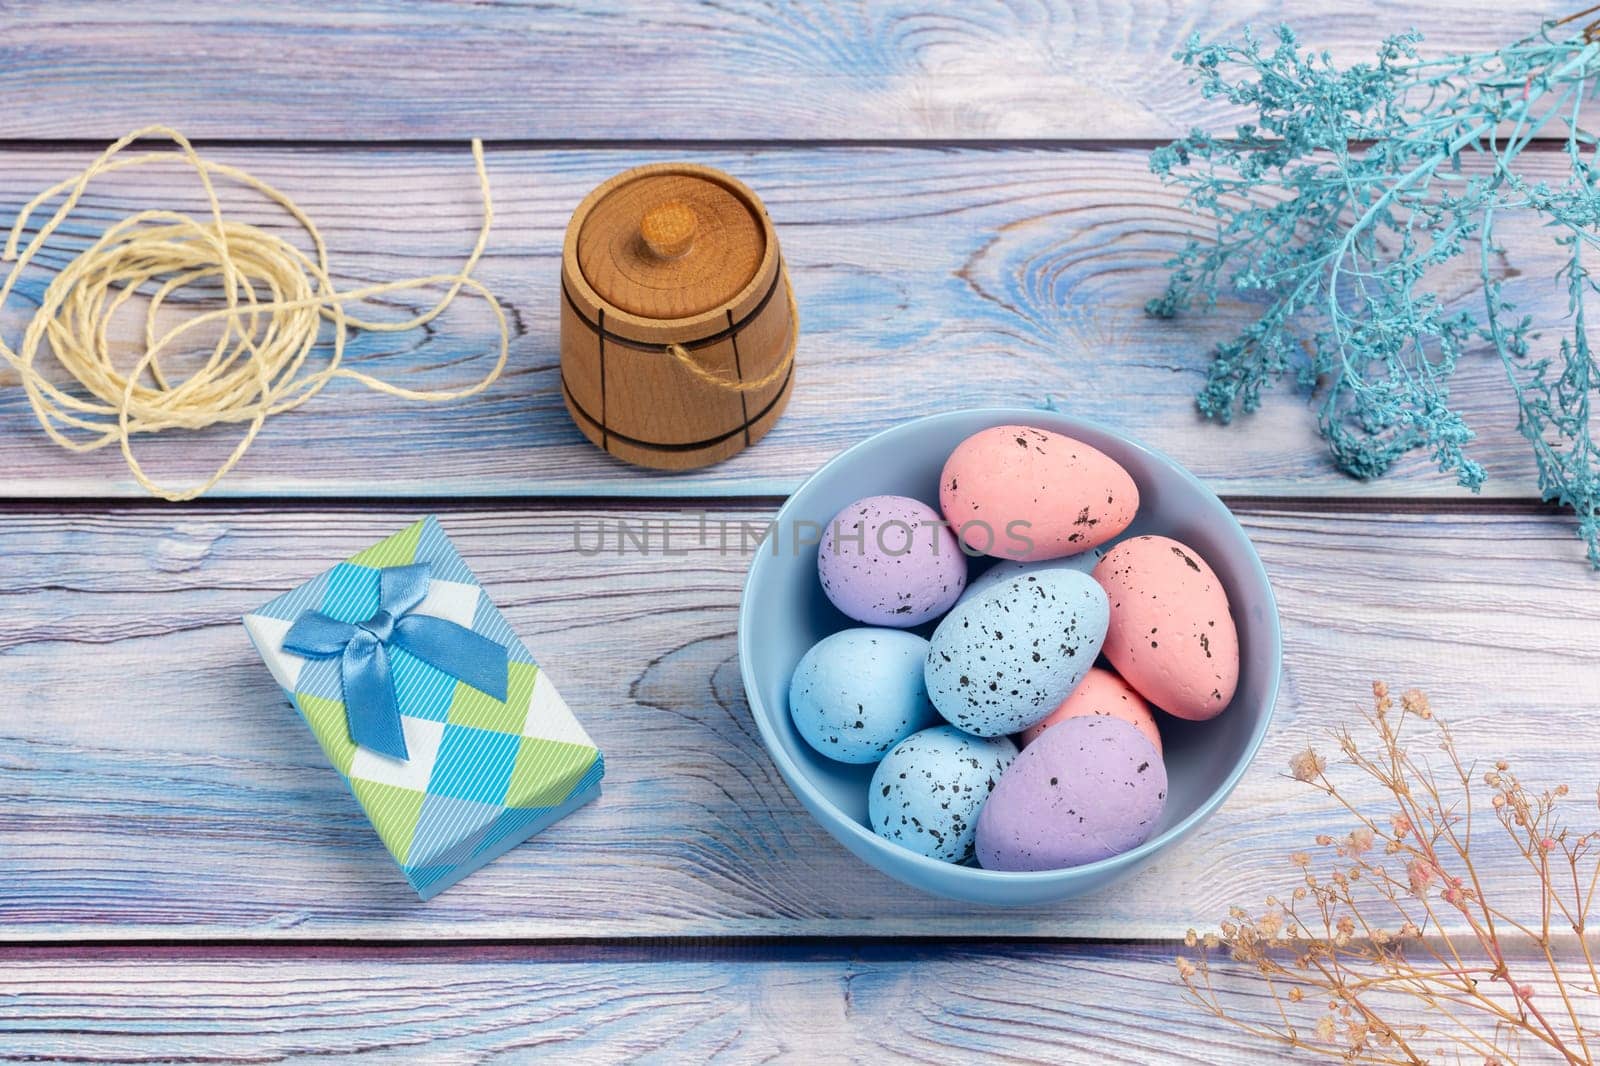 Bowl with colored Easter eggs, a gift box, a small wooden barrel and a rope on the boards. Top view.